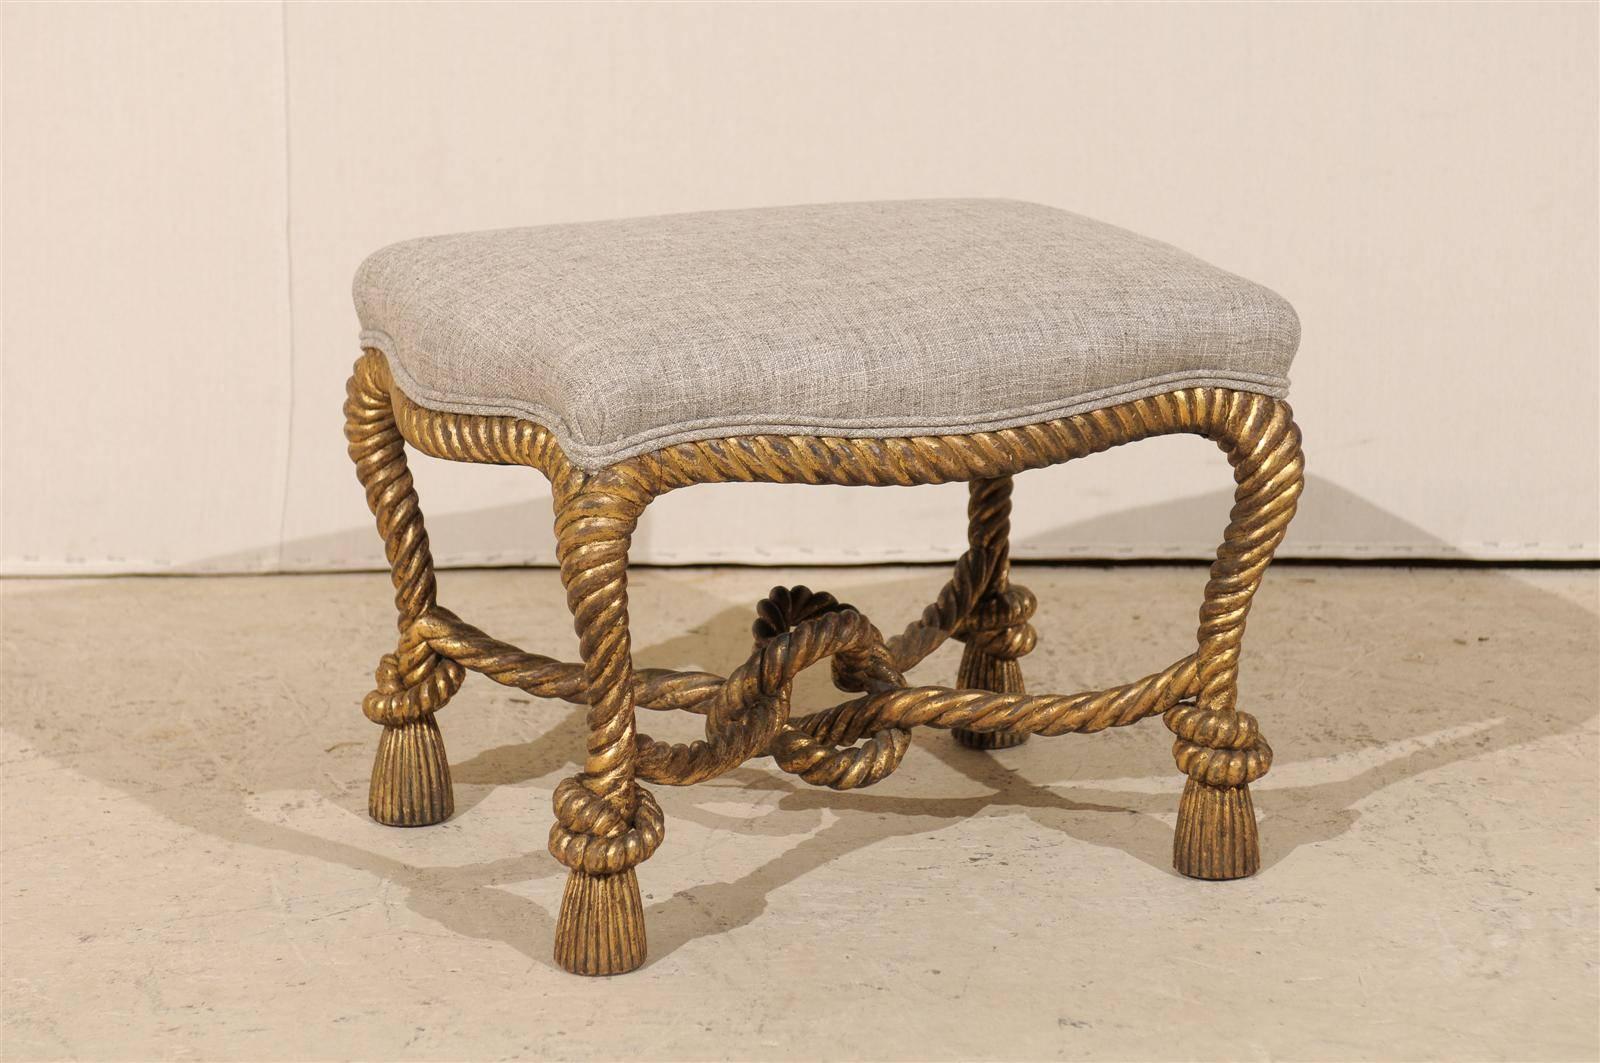 An Italian carved and giltwood stool. This stool has elegant 